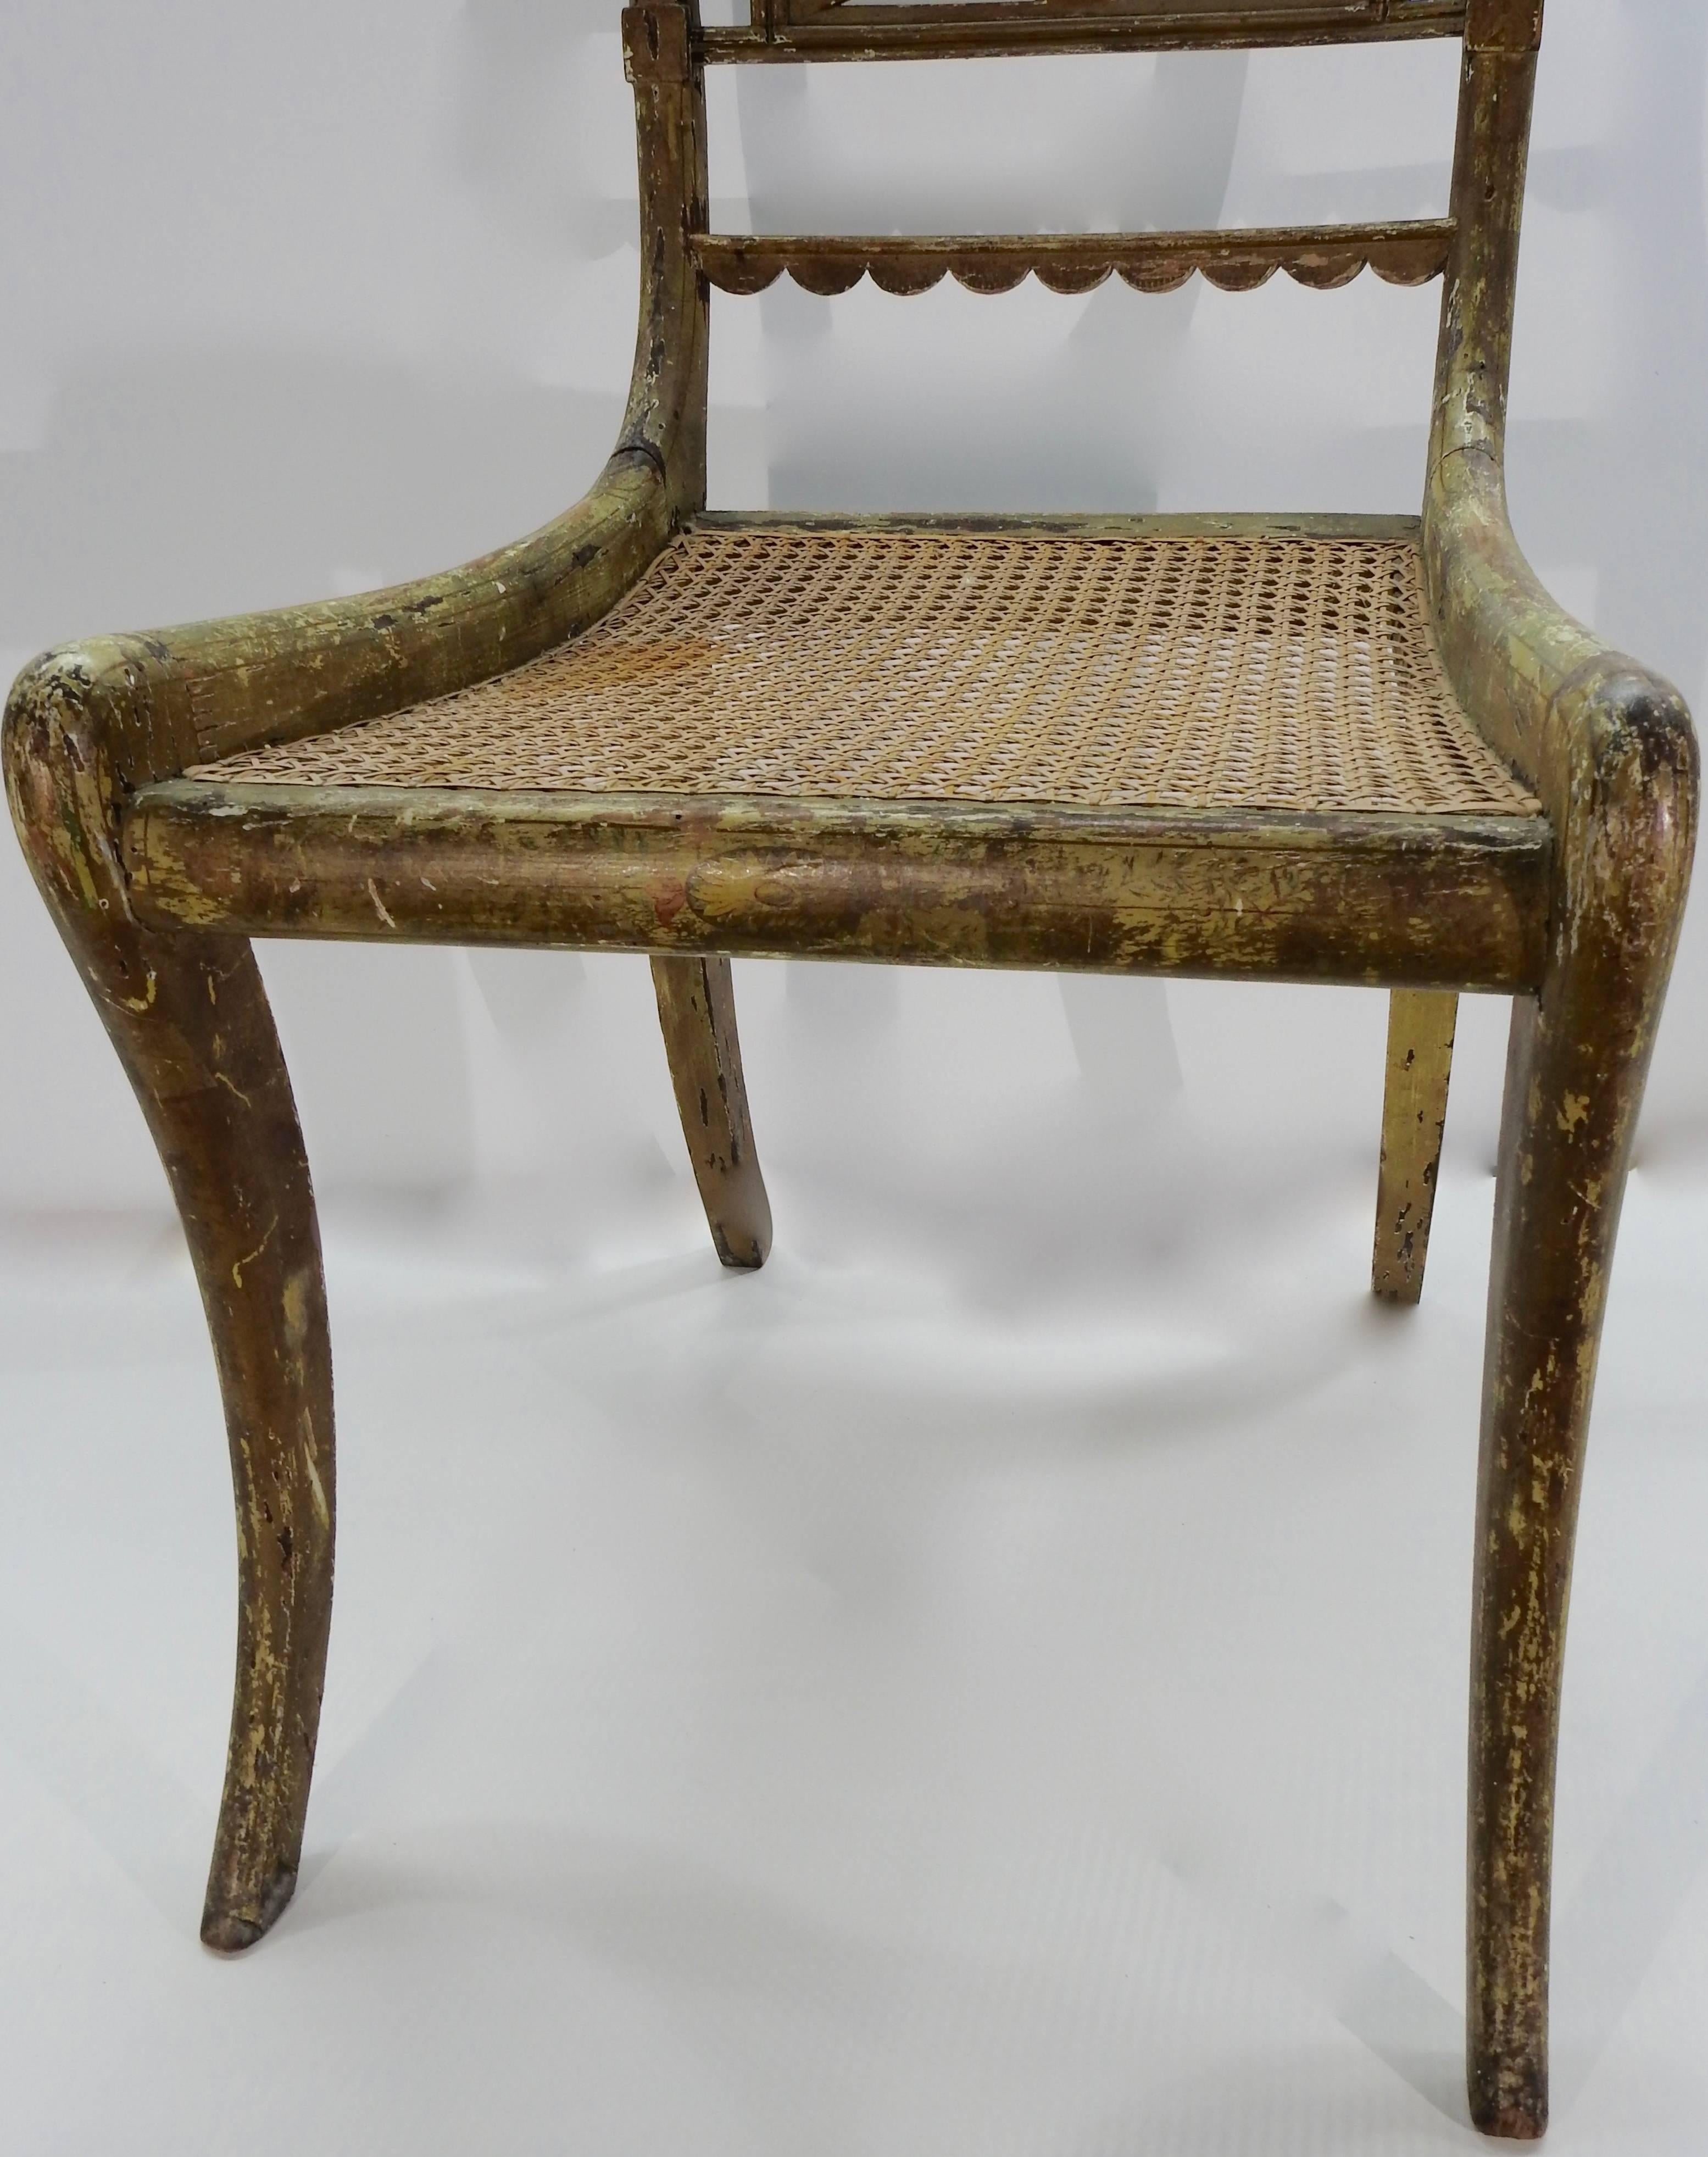 Offering this stunning French cane bottom side chair. The woodwork on this side chair is outstanding. From the scalloped stretcher, the openwork diamonds, and swirled stretcher at the top of the back to the cane bottom seat. The centerpiece in the